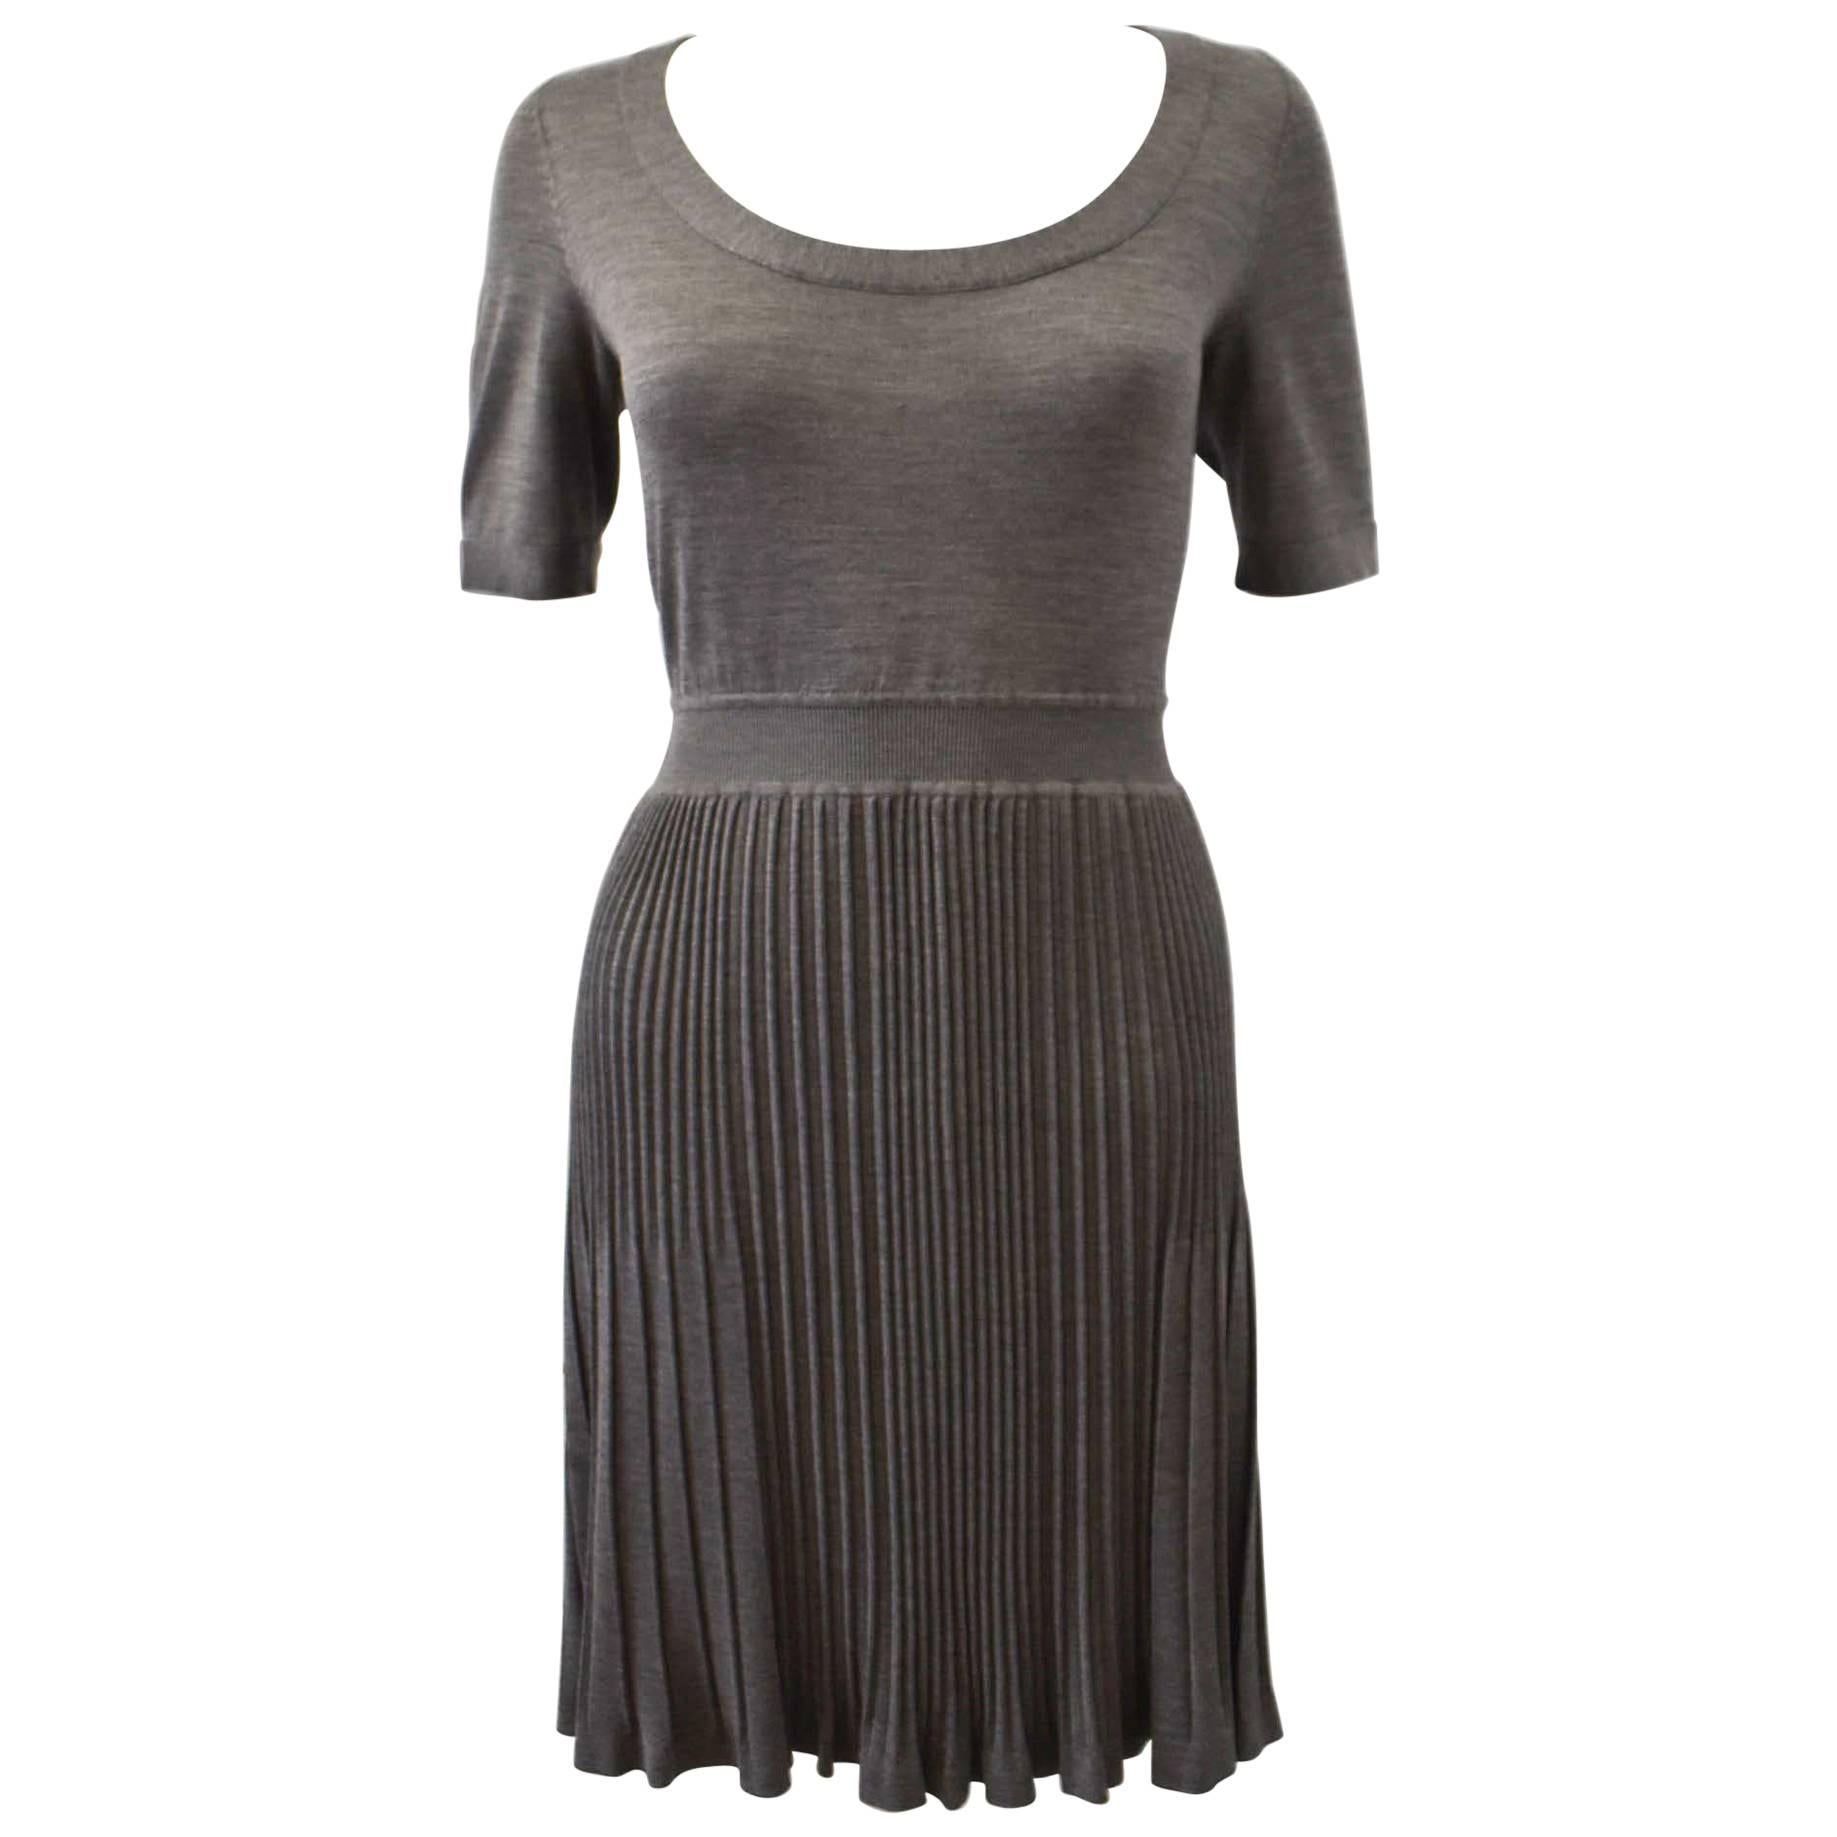 Balenciaga Grey Silk and Cashmere Fine Knit Dress with Pleated Skirt 2009